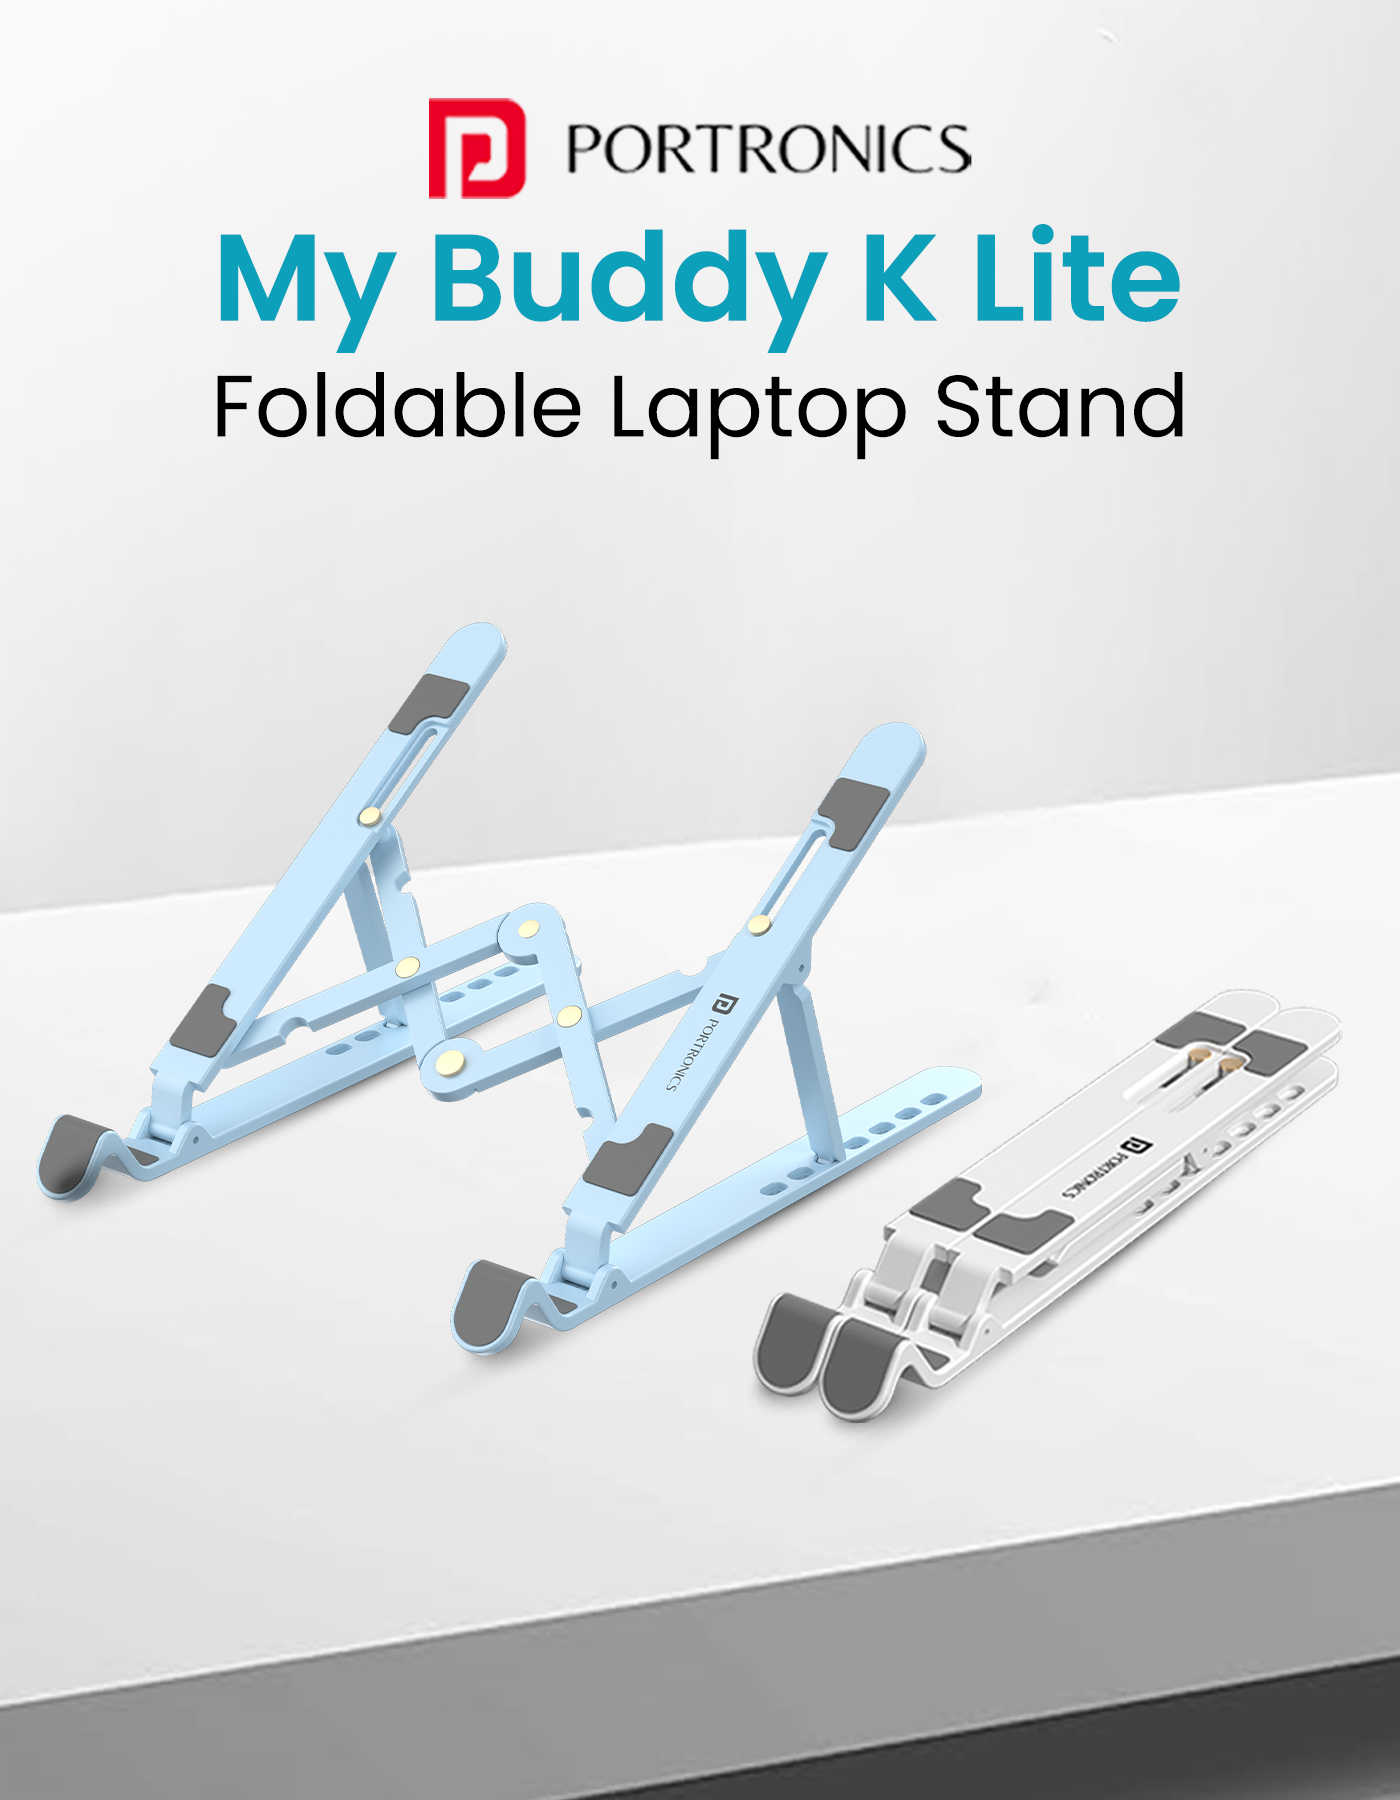 My buddy K lite portable and foldable laptop stand